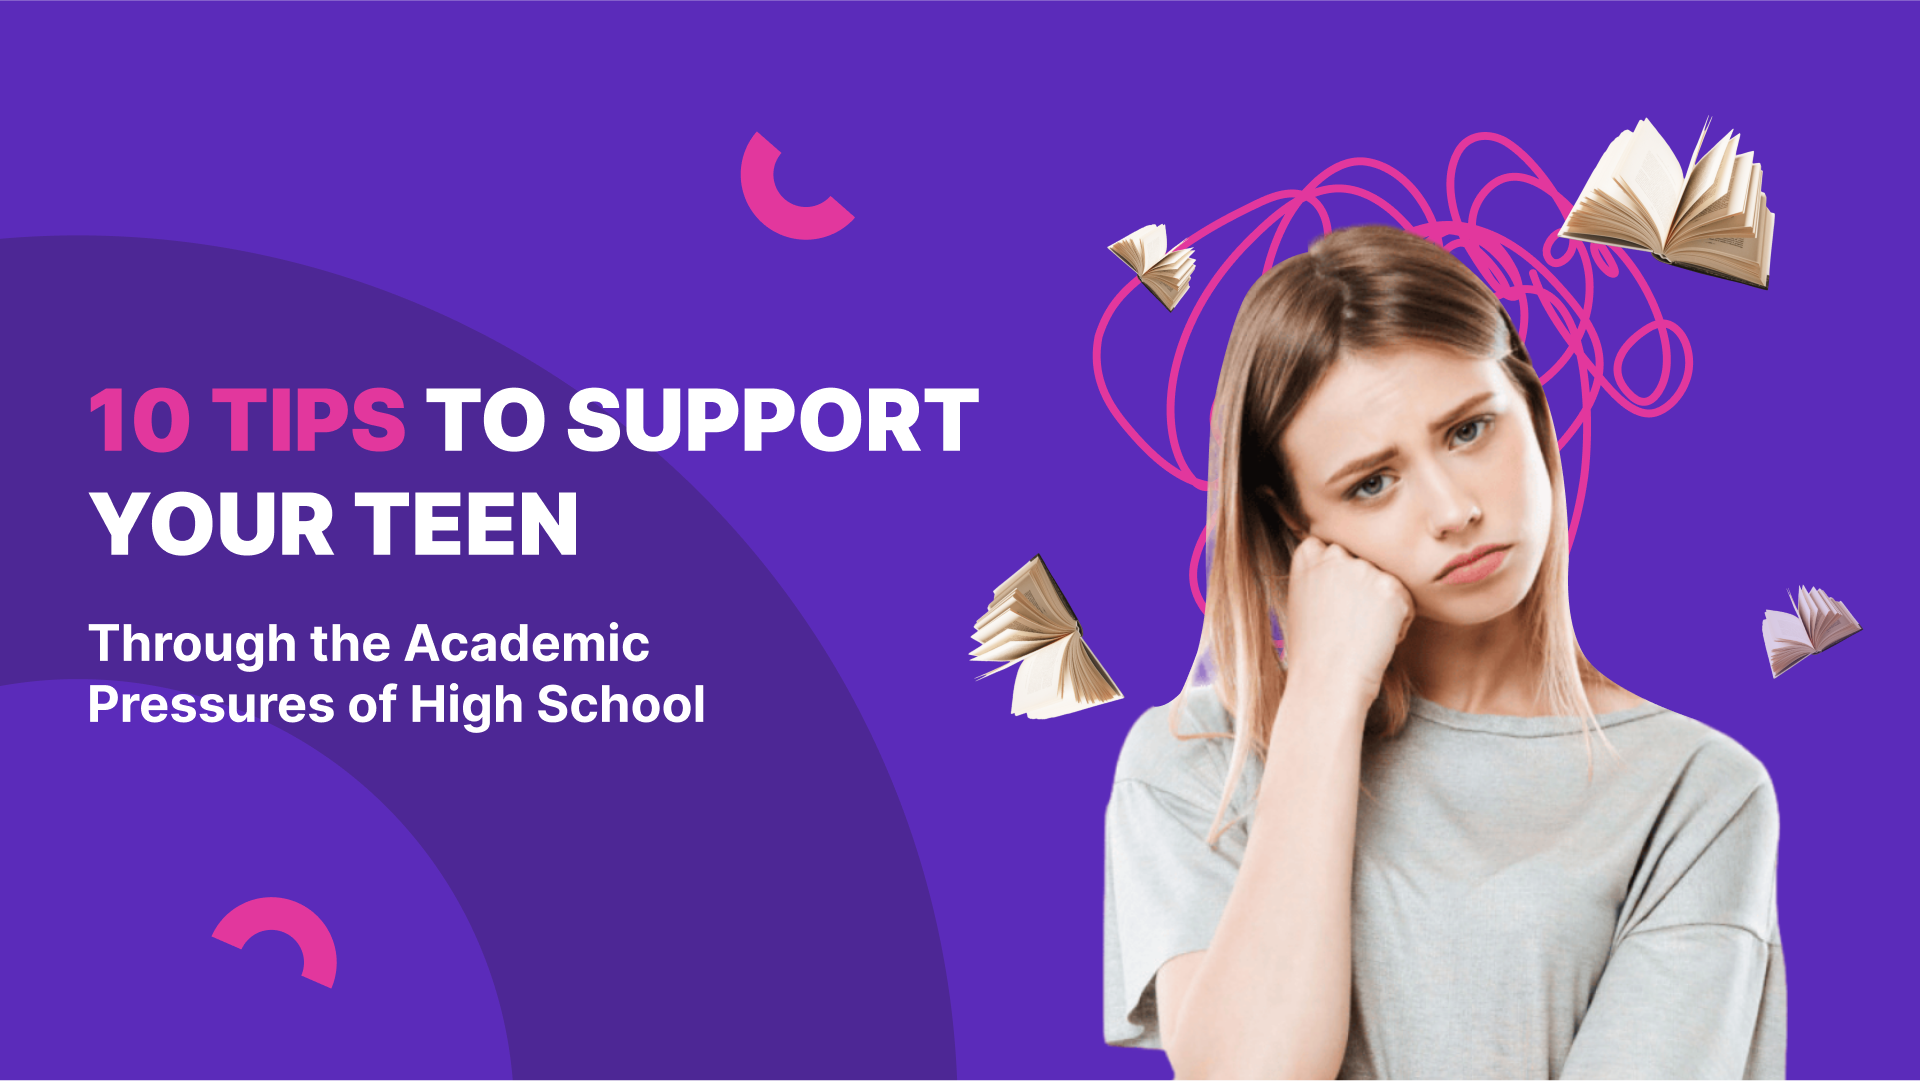 10 Tips to Support Your Teen Through the Academic Pressures of High School